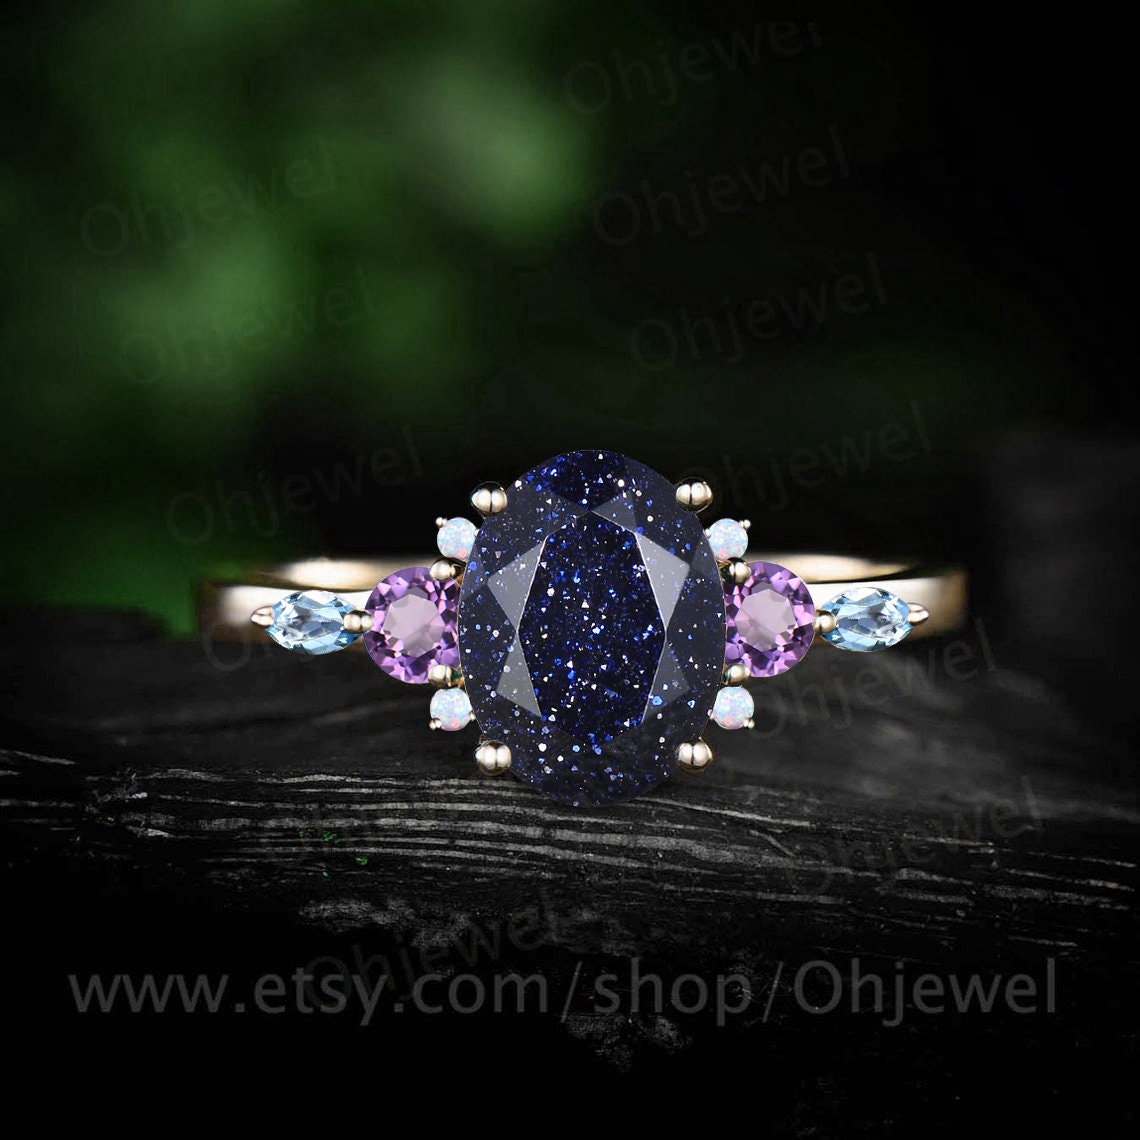 Oval cut blue sandstone ring engagement ring rose gold cluster opal amethyst topaz ring women unique wedding ring birthstone ring silver